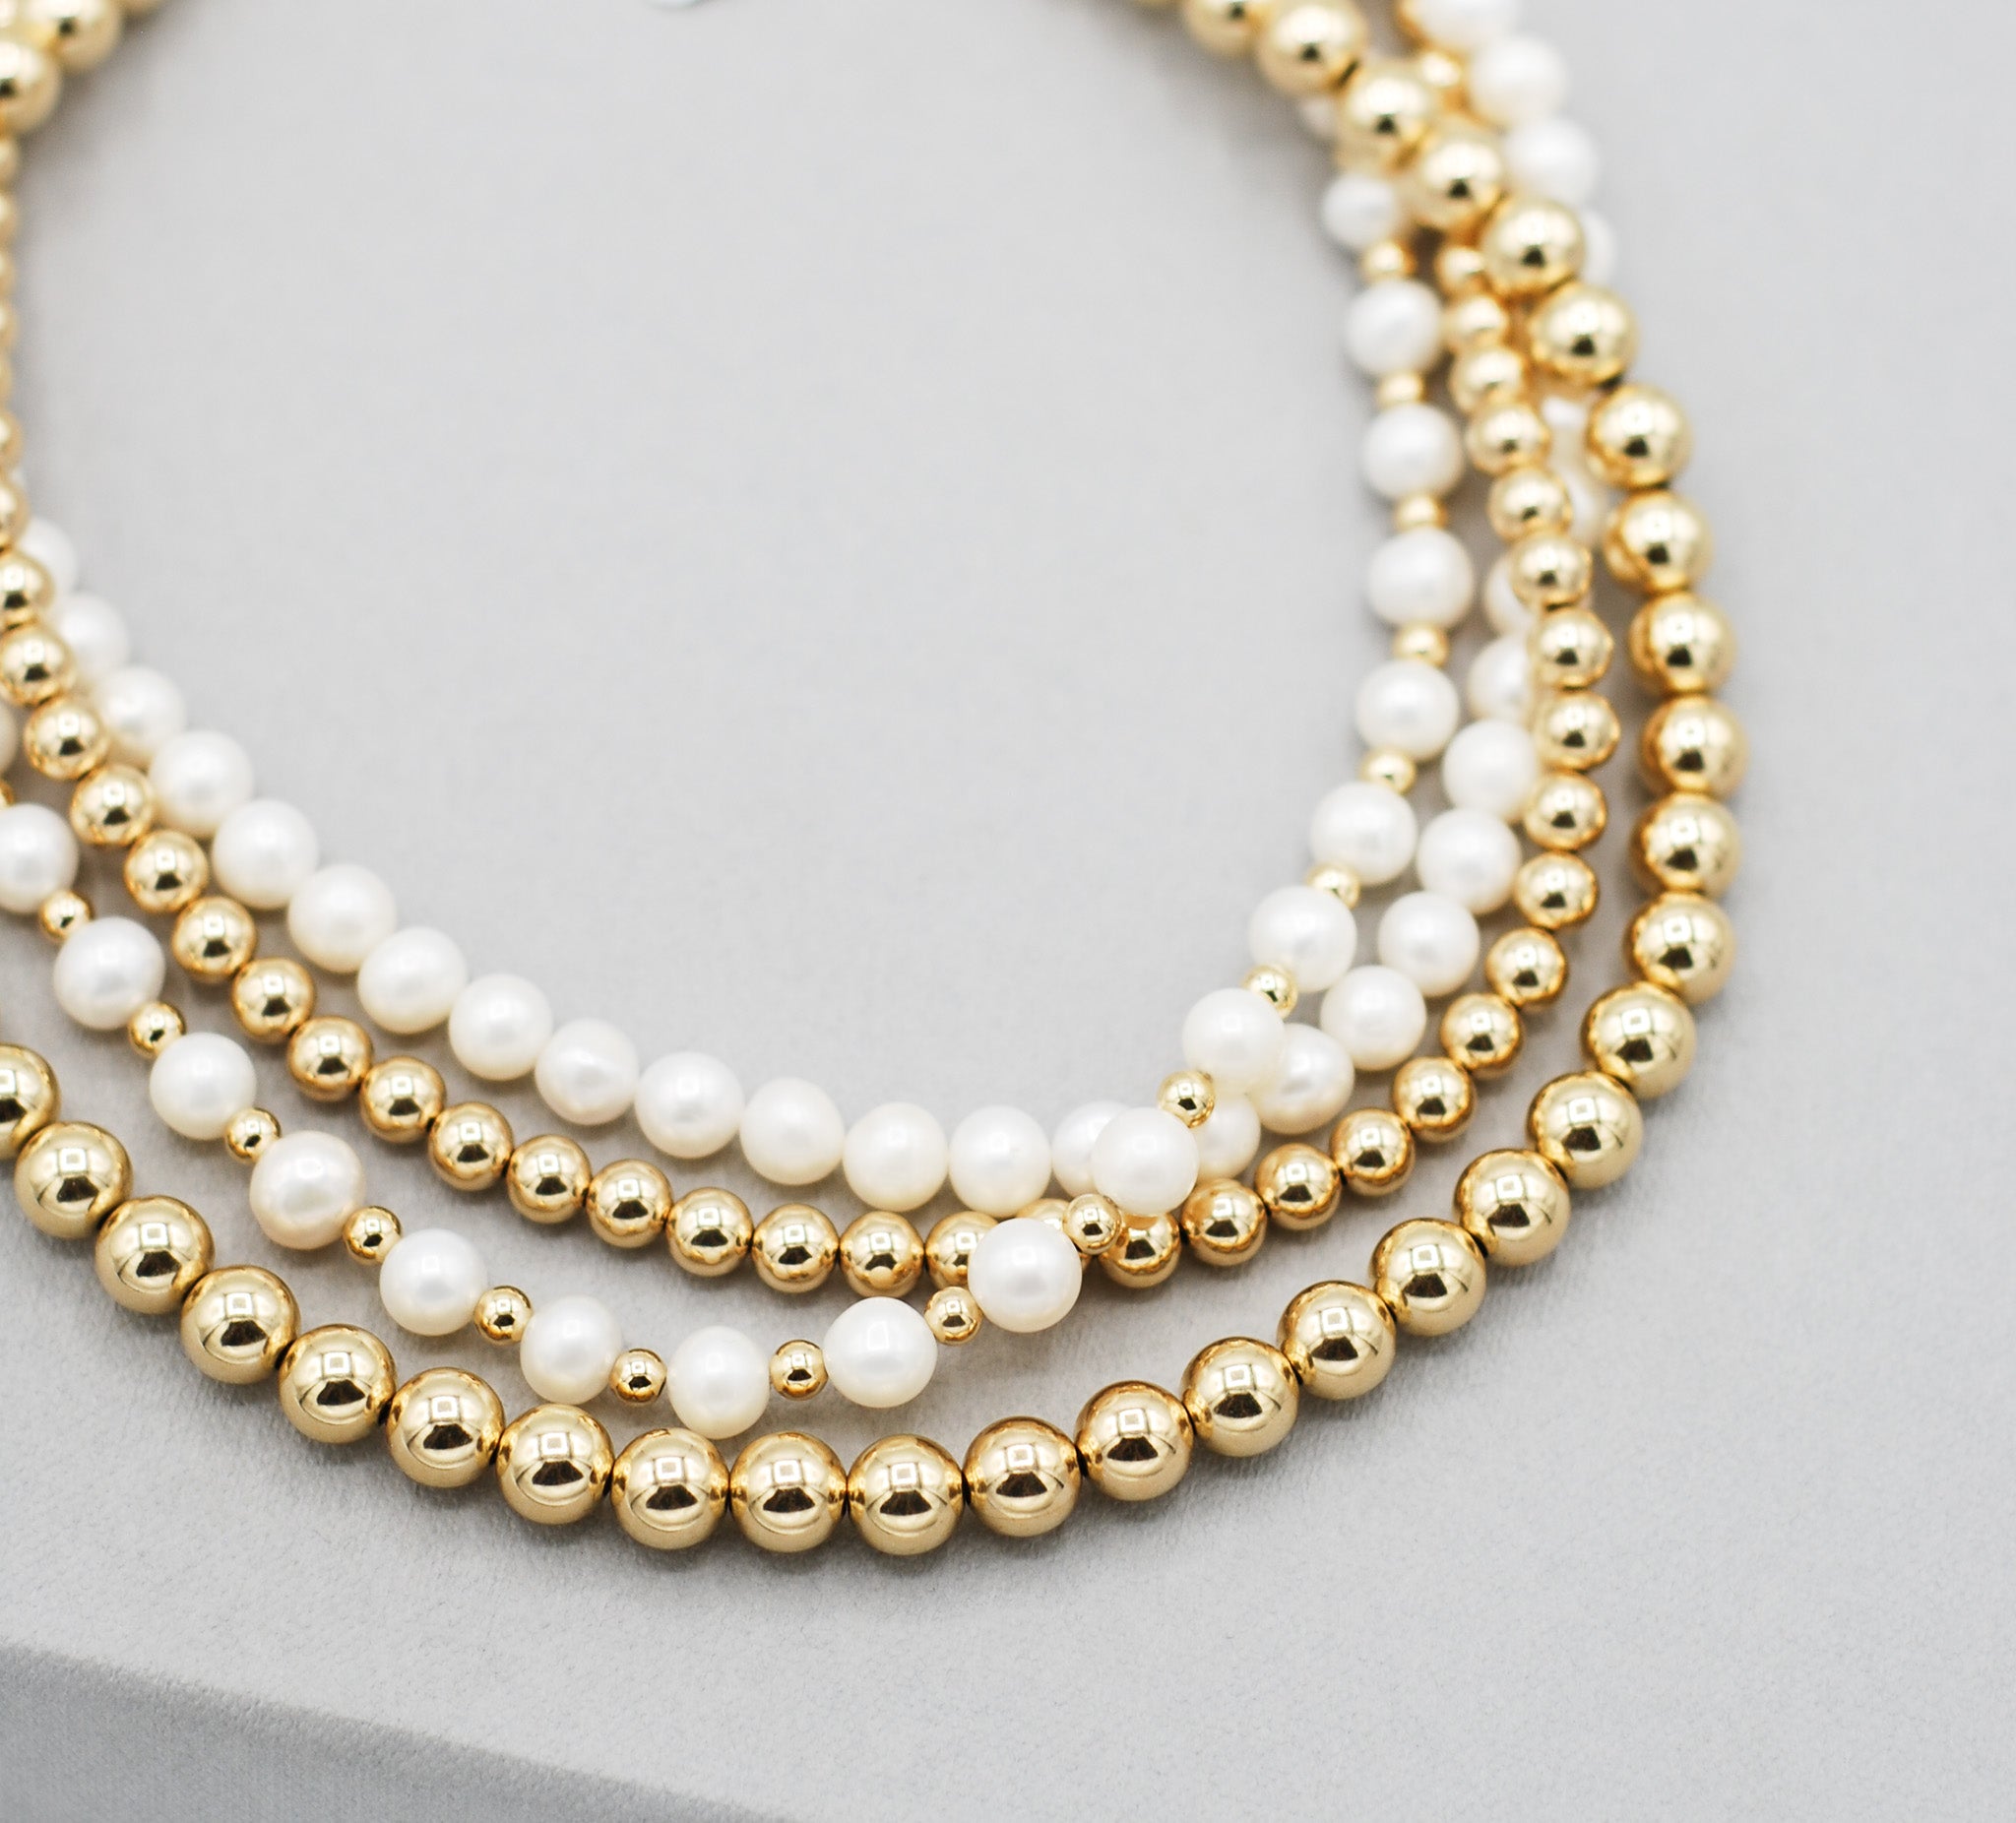 14k Gold Filled 8mm Beaded Lux Necklace